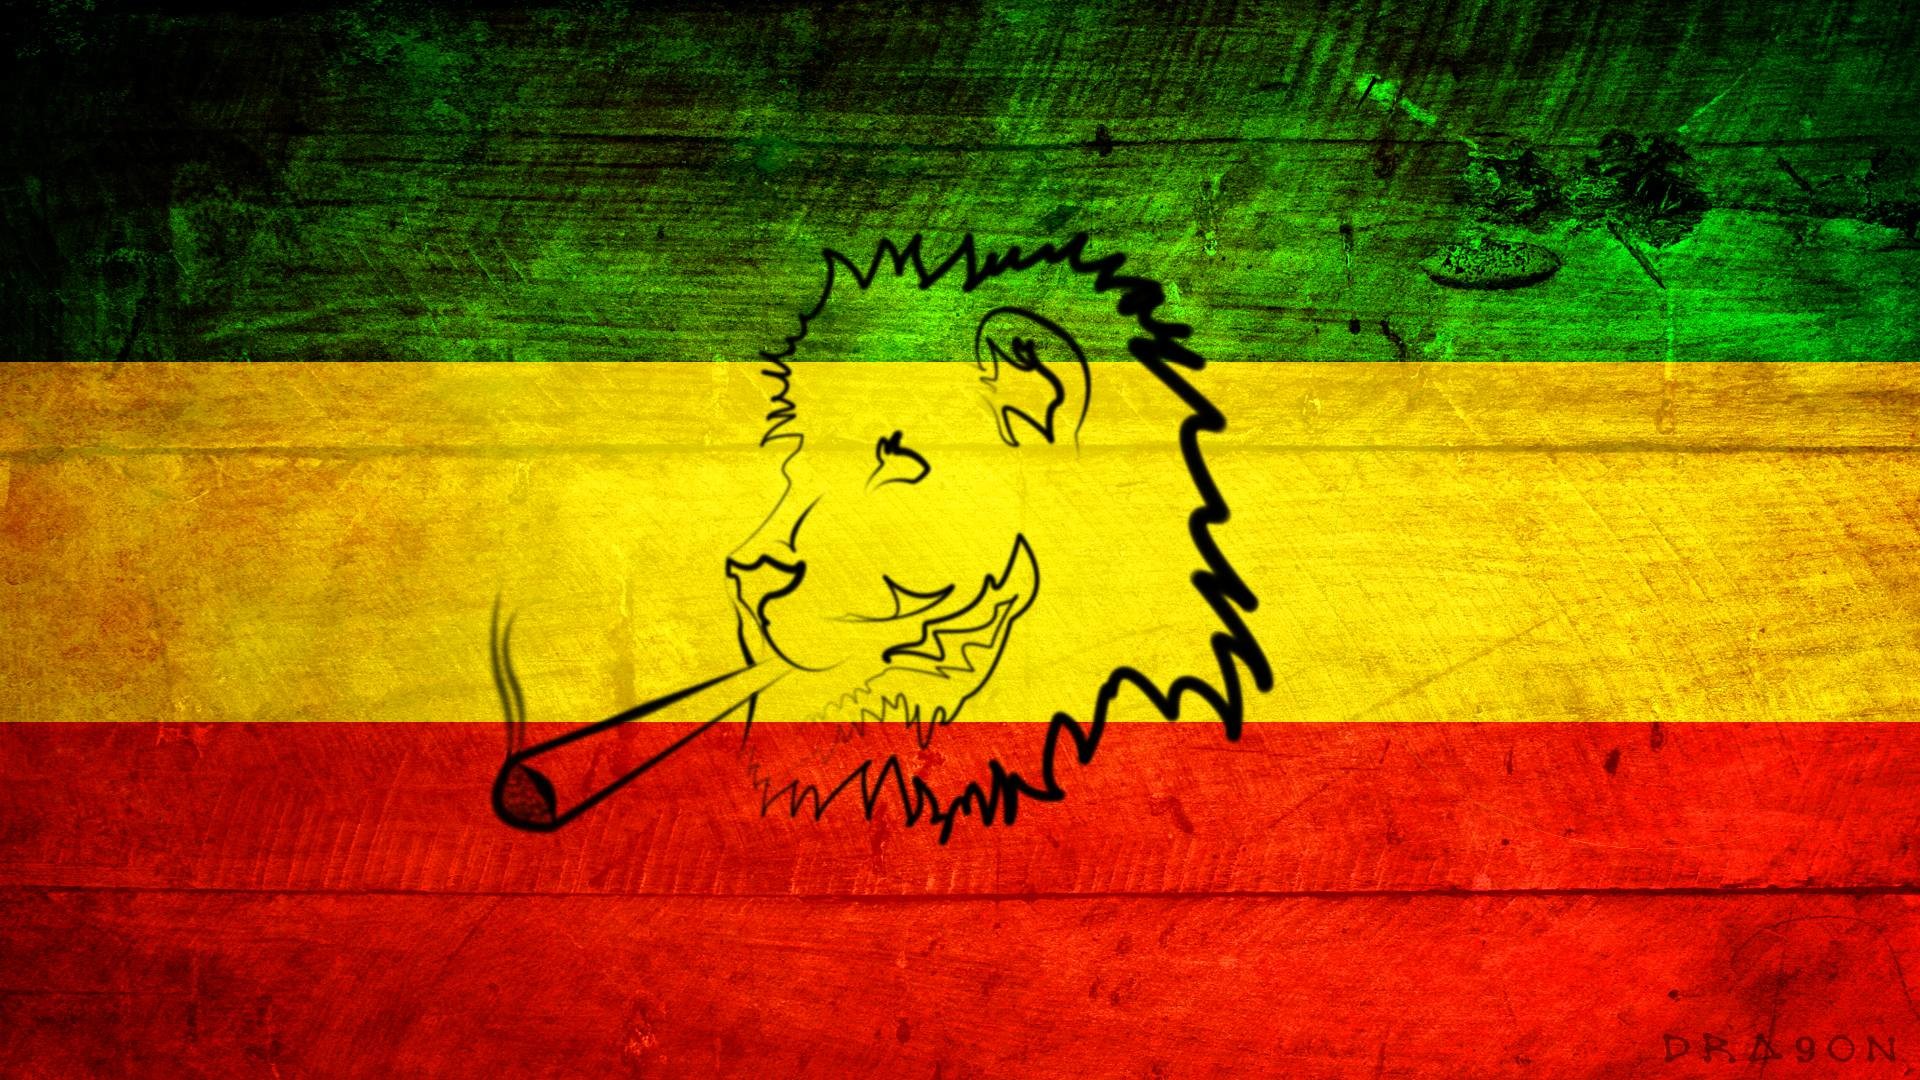 1920x1080 Rasta Wallpapers HD | Wallpapers, Backgrounds, Images, Art Photos.